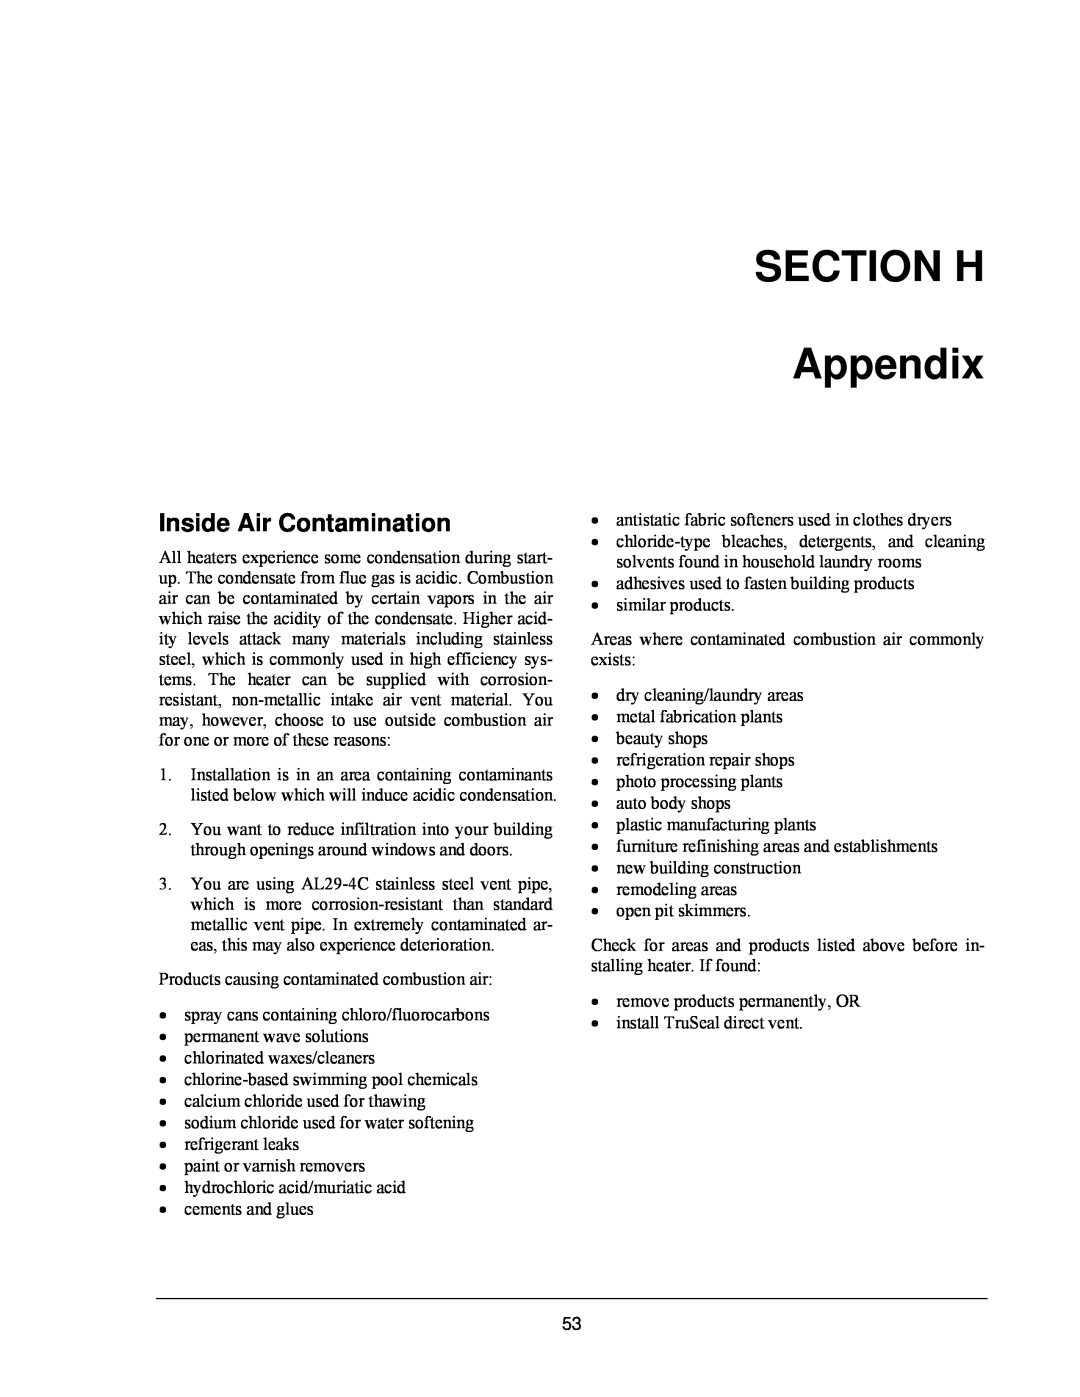 Raypak 503-2003 manual SECTION H Appendix, Inside Air Contamination 